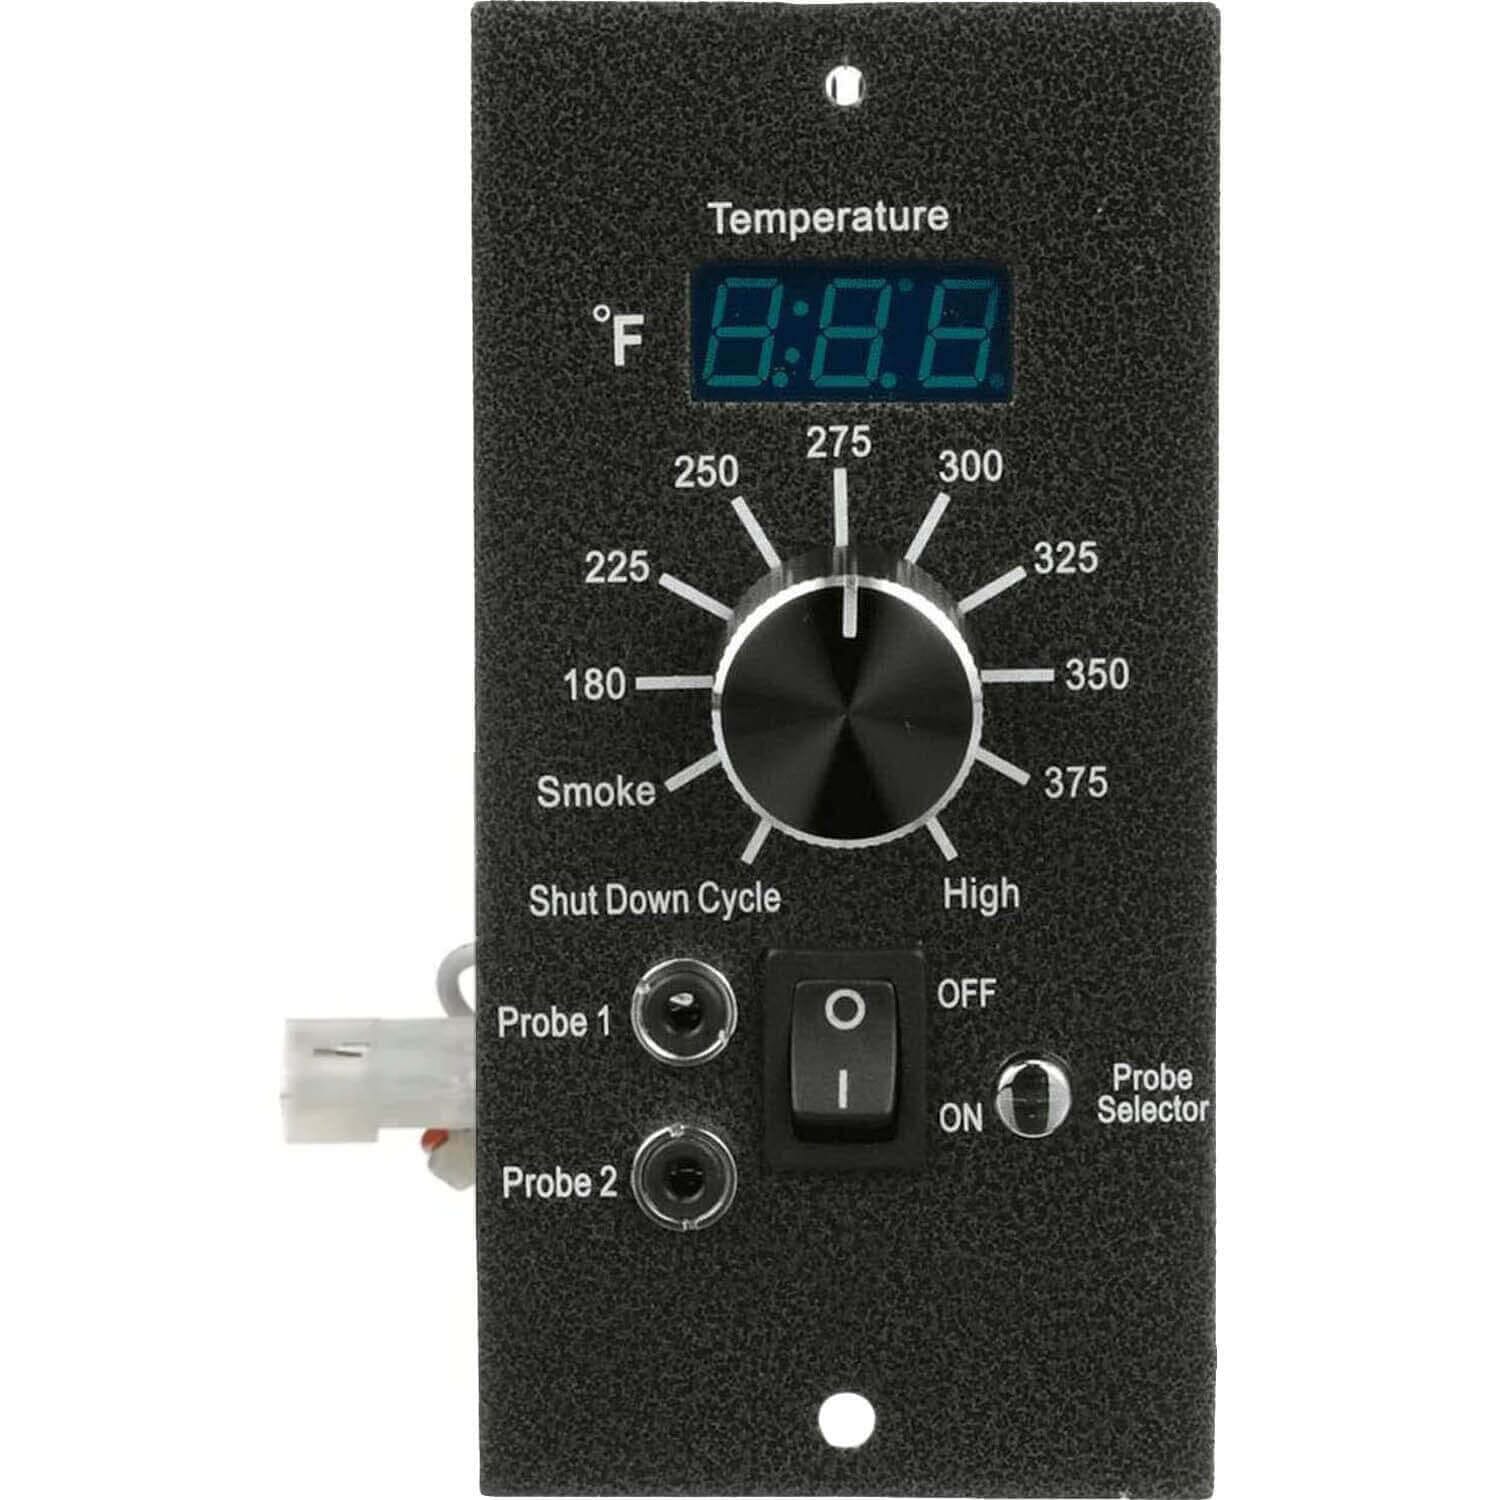 Filter traeger pro 780 Parts By Type: Control Boards